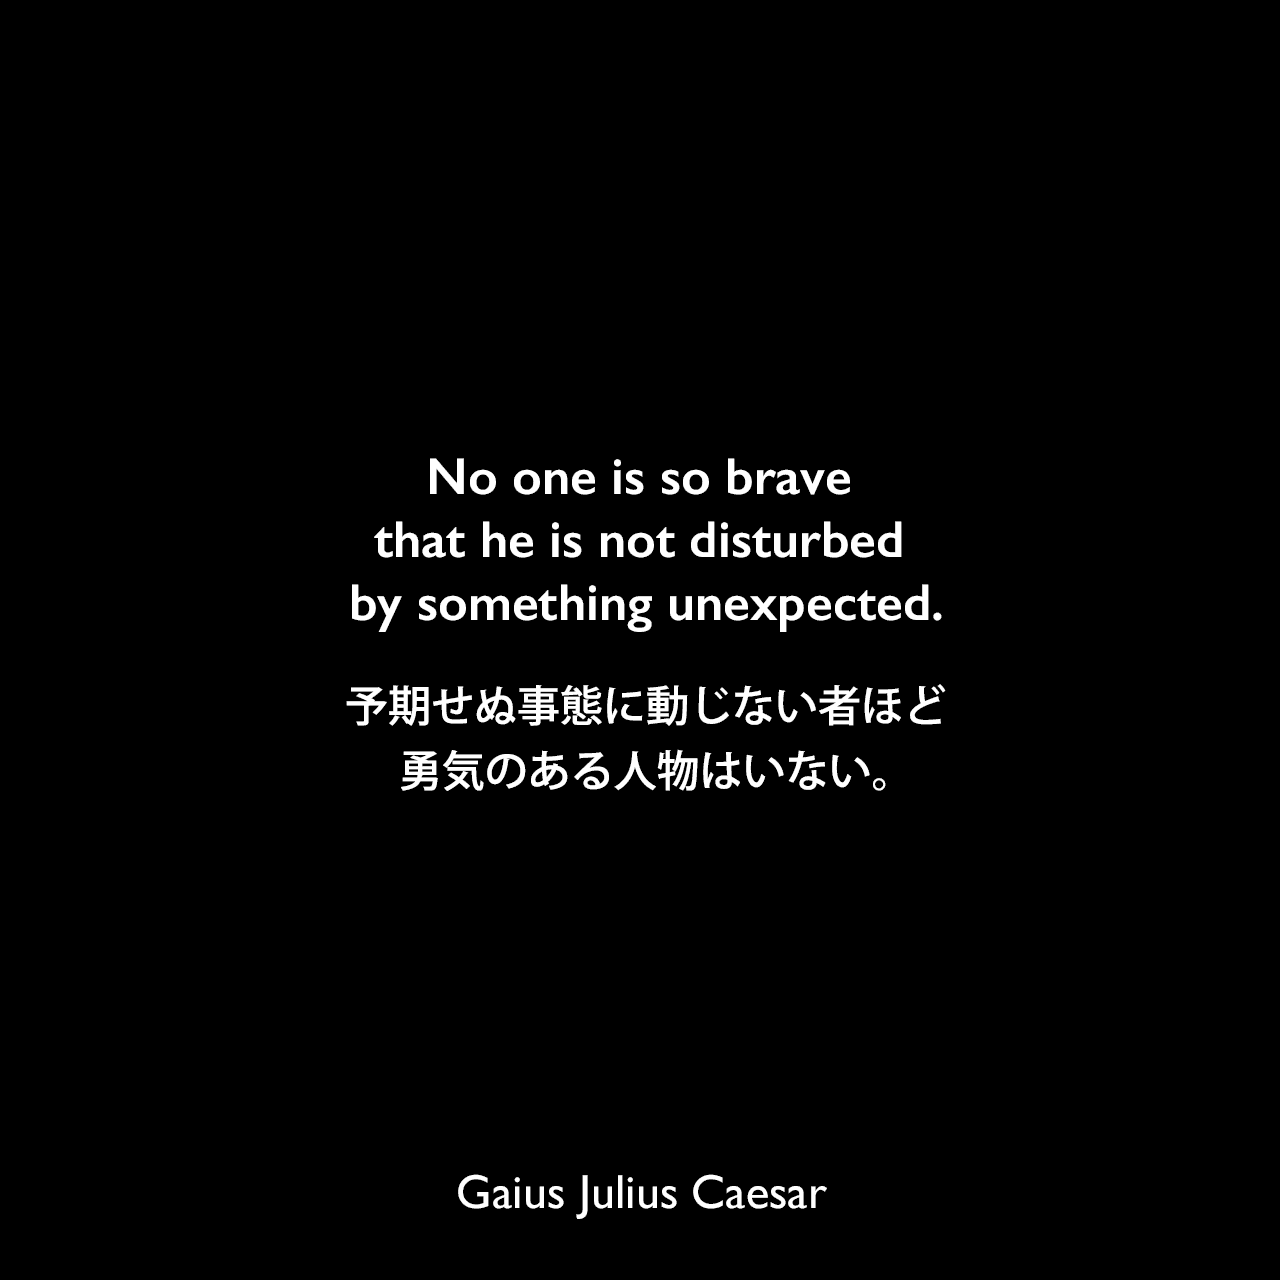 No one is so brave that he is not disturbed by something unexpected.予期せぬ事態に動じない者ほど、勇気のある人物はいない。Gaius Julius Caesar